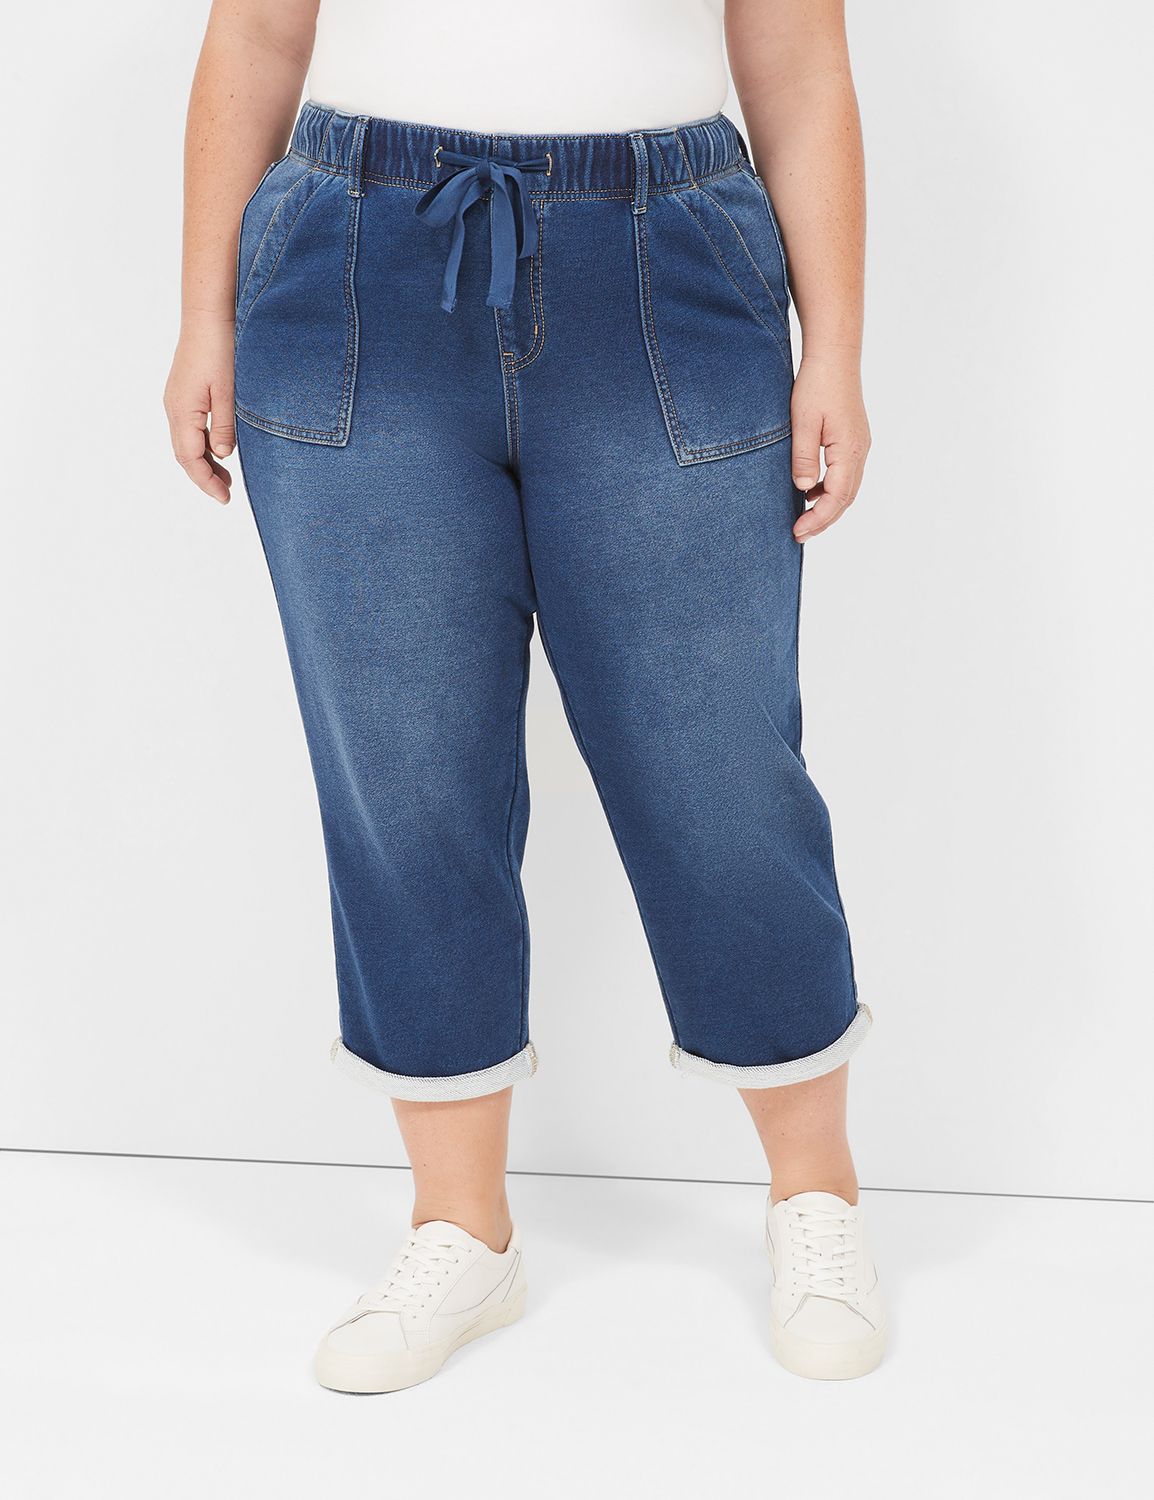 The Collection at RiverPark - Have you tried Lane Bryant jeans with the new  FLEX Magic Waistband yet?! #TheCollectionRP #LaneBryant #PlusSizeDenim  #LaneBryantDenim #CurvyDenim